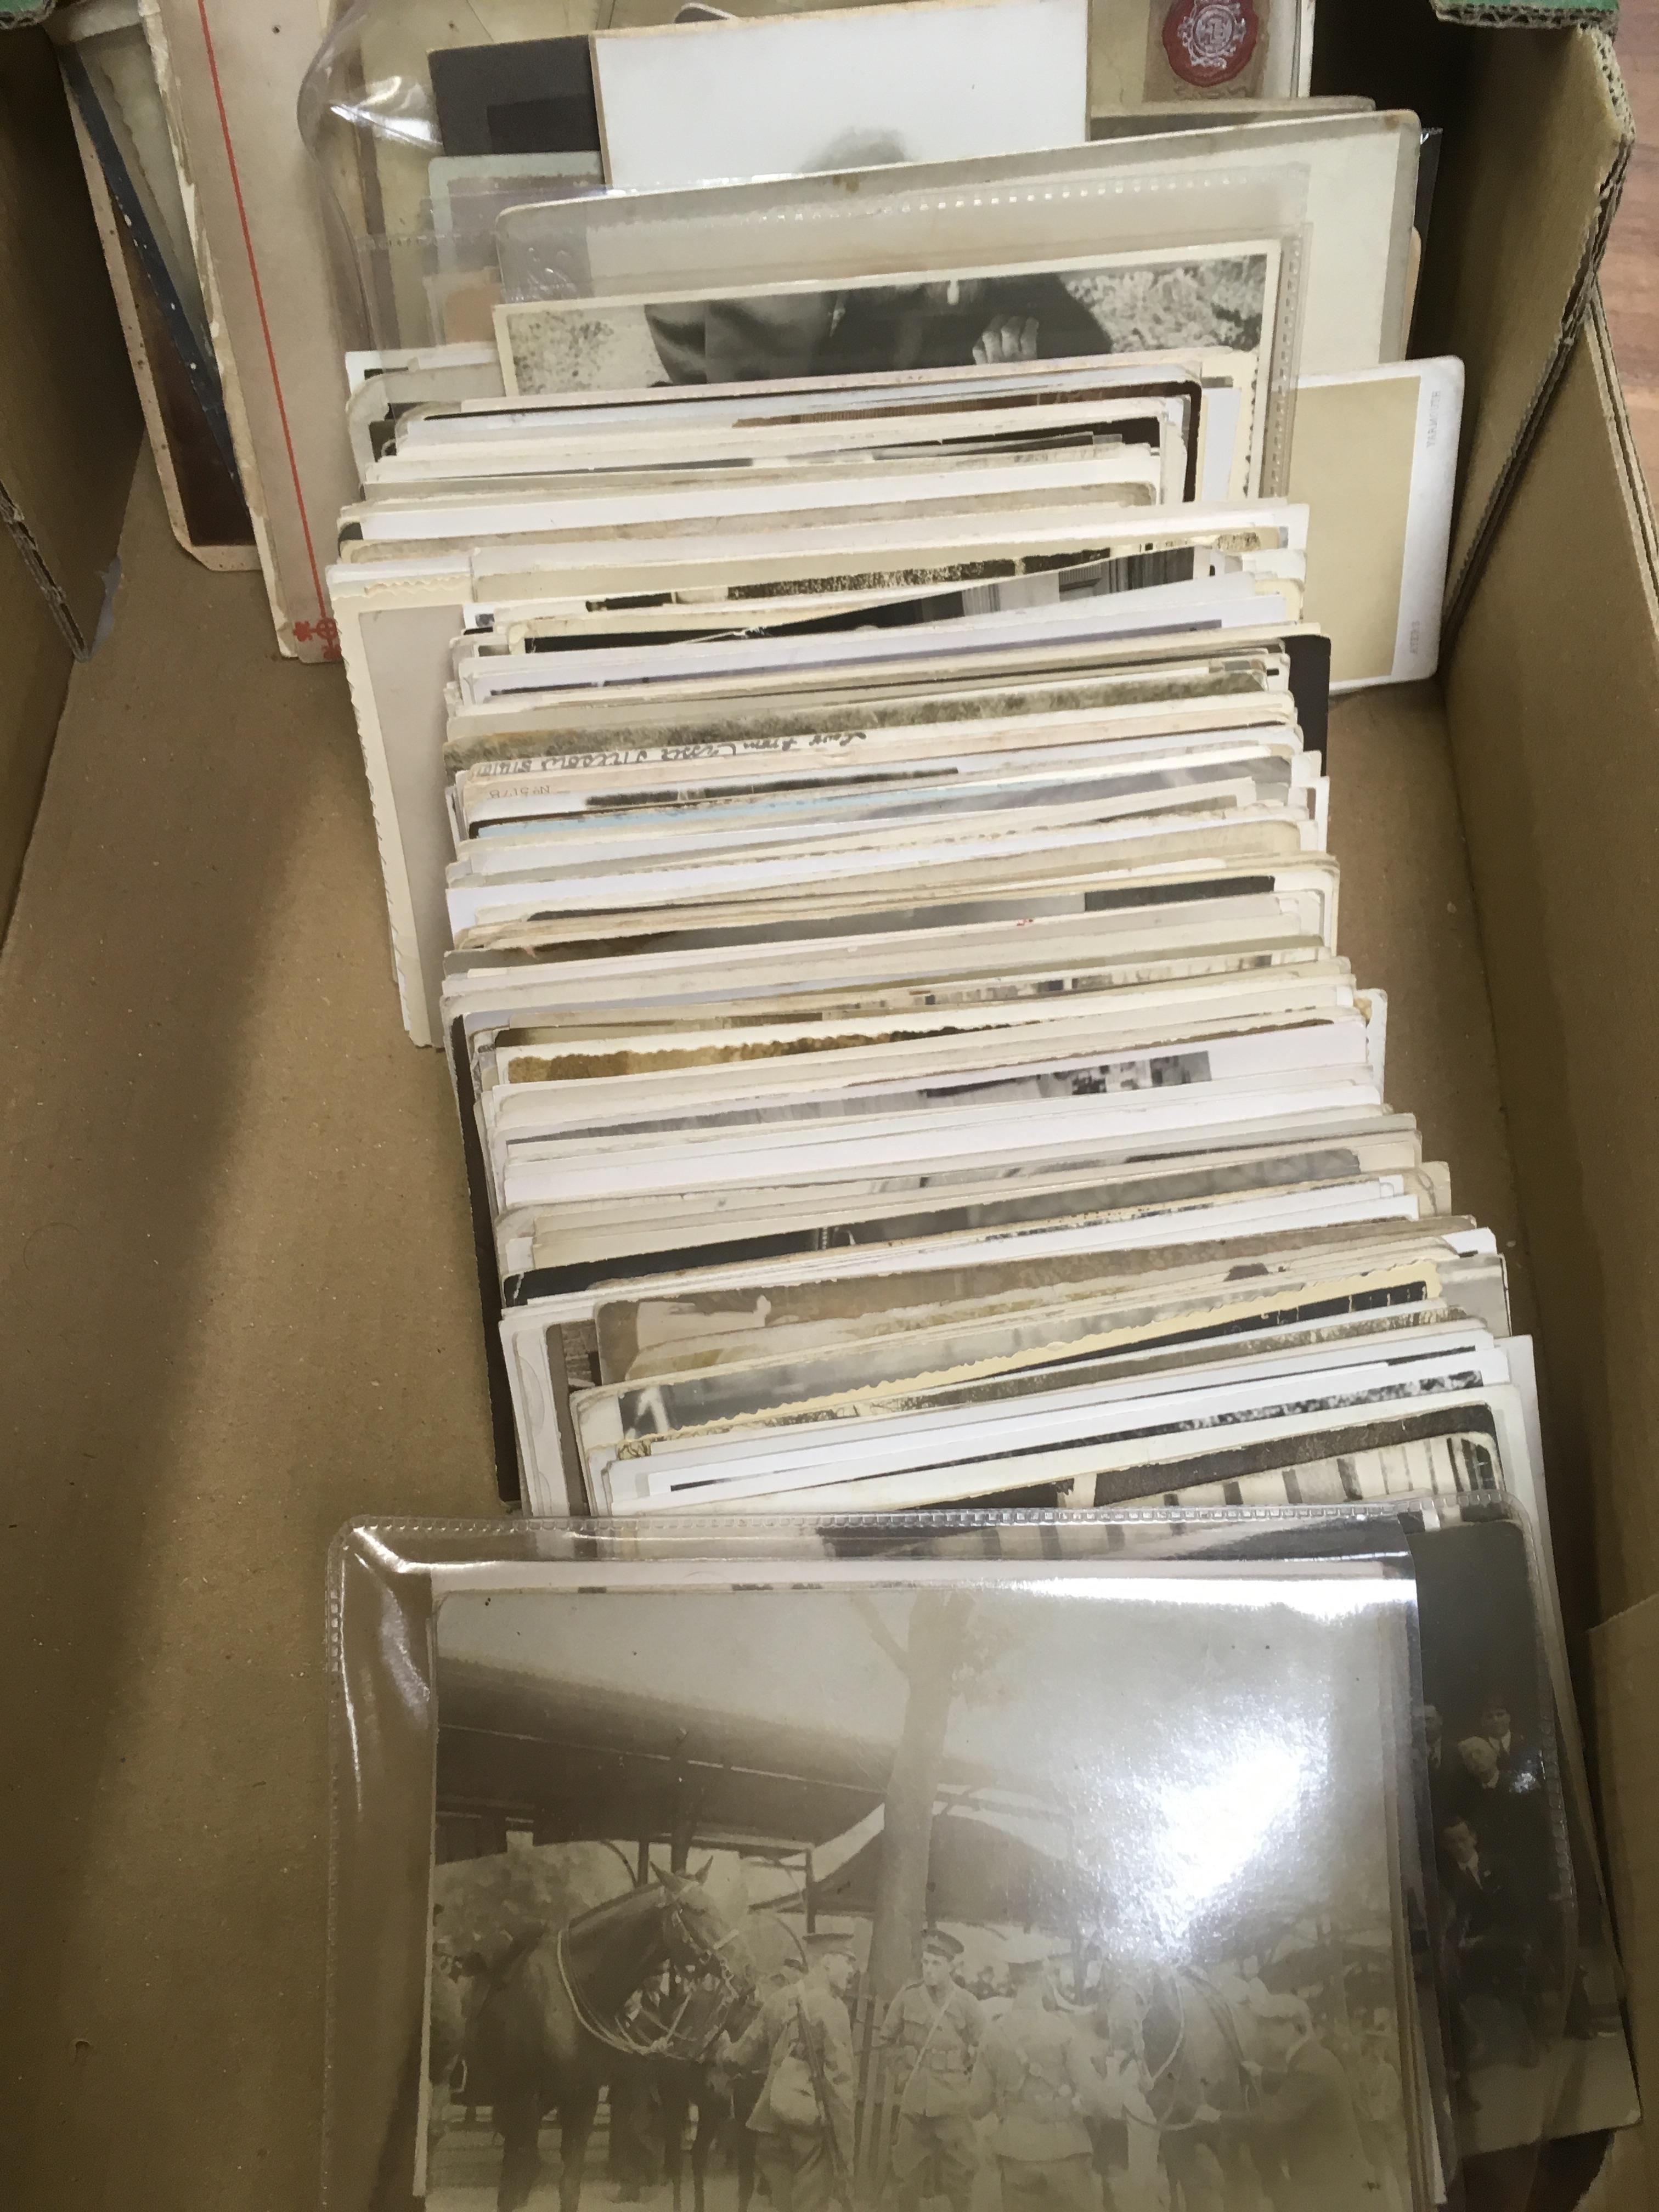 BOX OF POSTCARDS WITH SOCIAL HISTORY PORTRAITS, FEW SHIPS, MILITARY ETC ALSO PHOTOGRAPHS ETC.